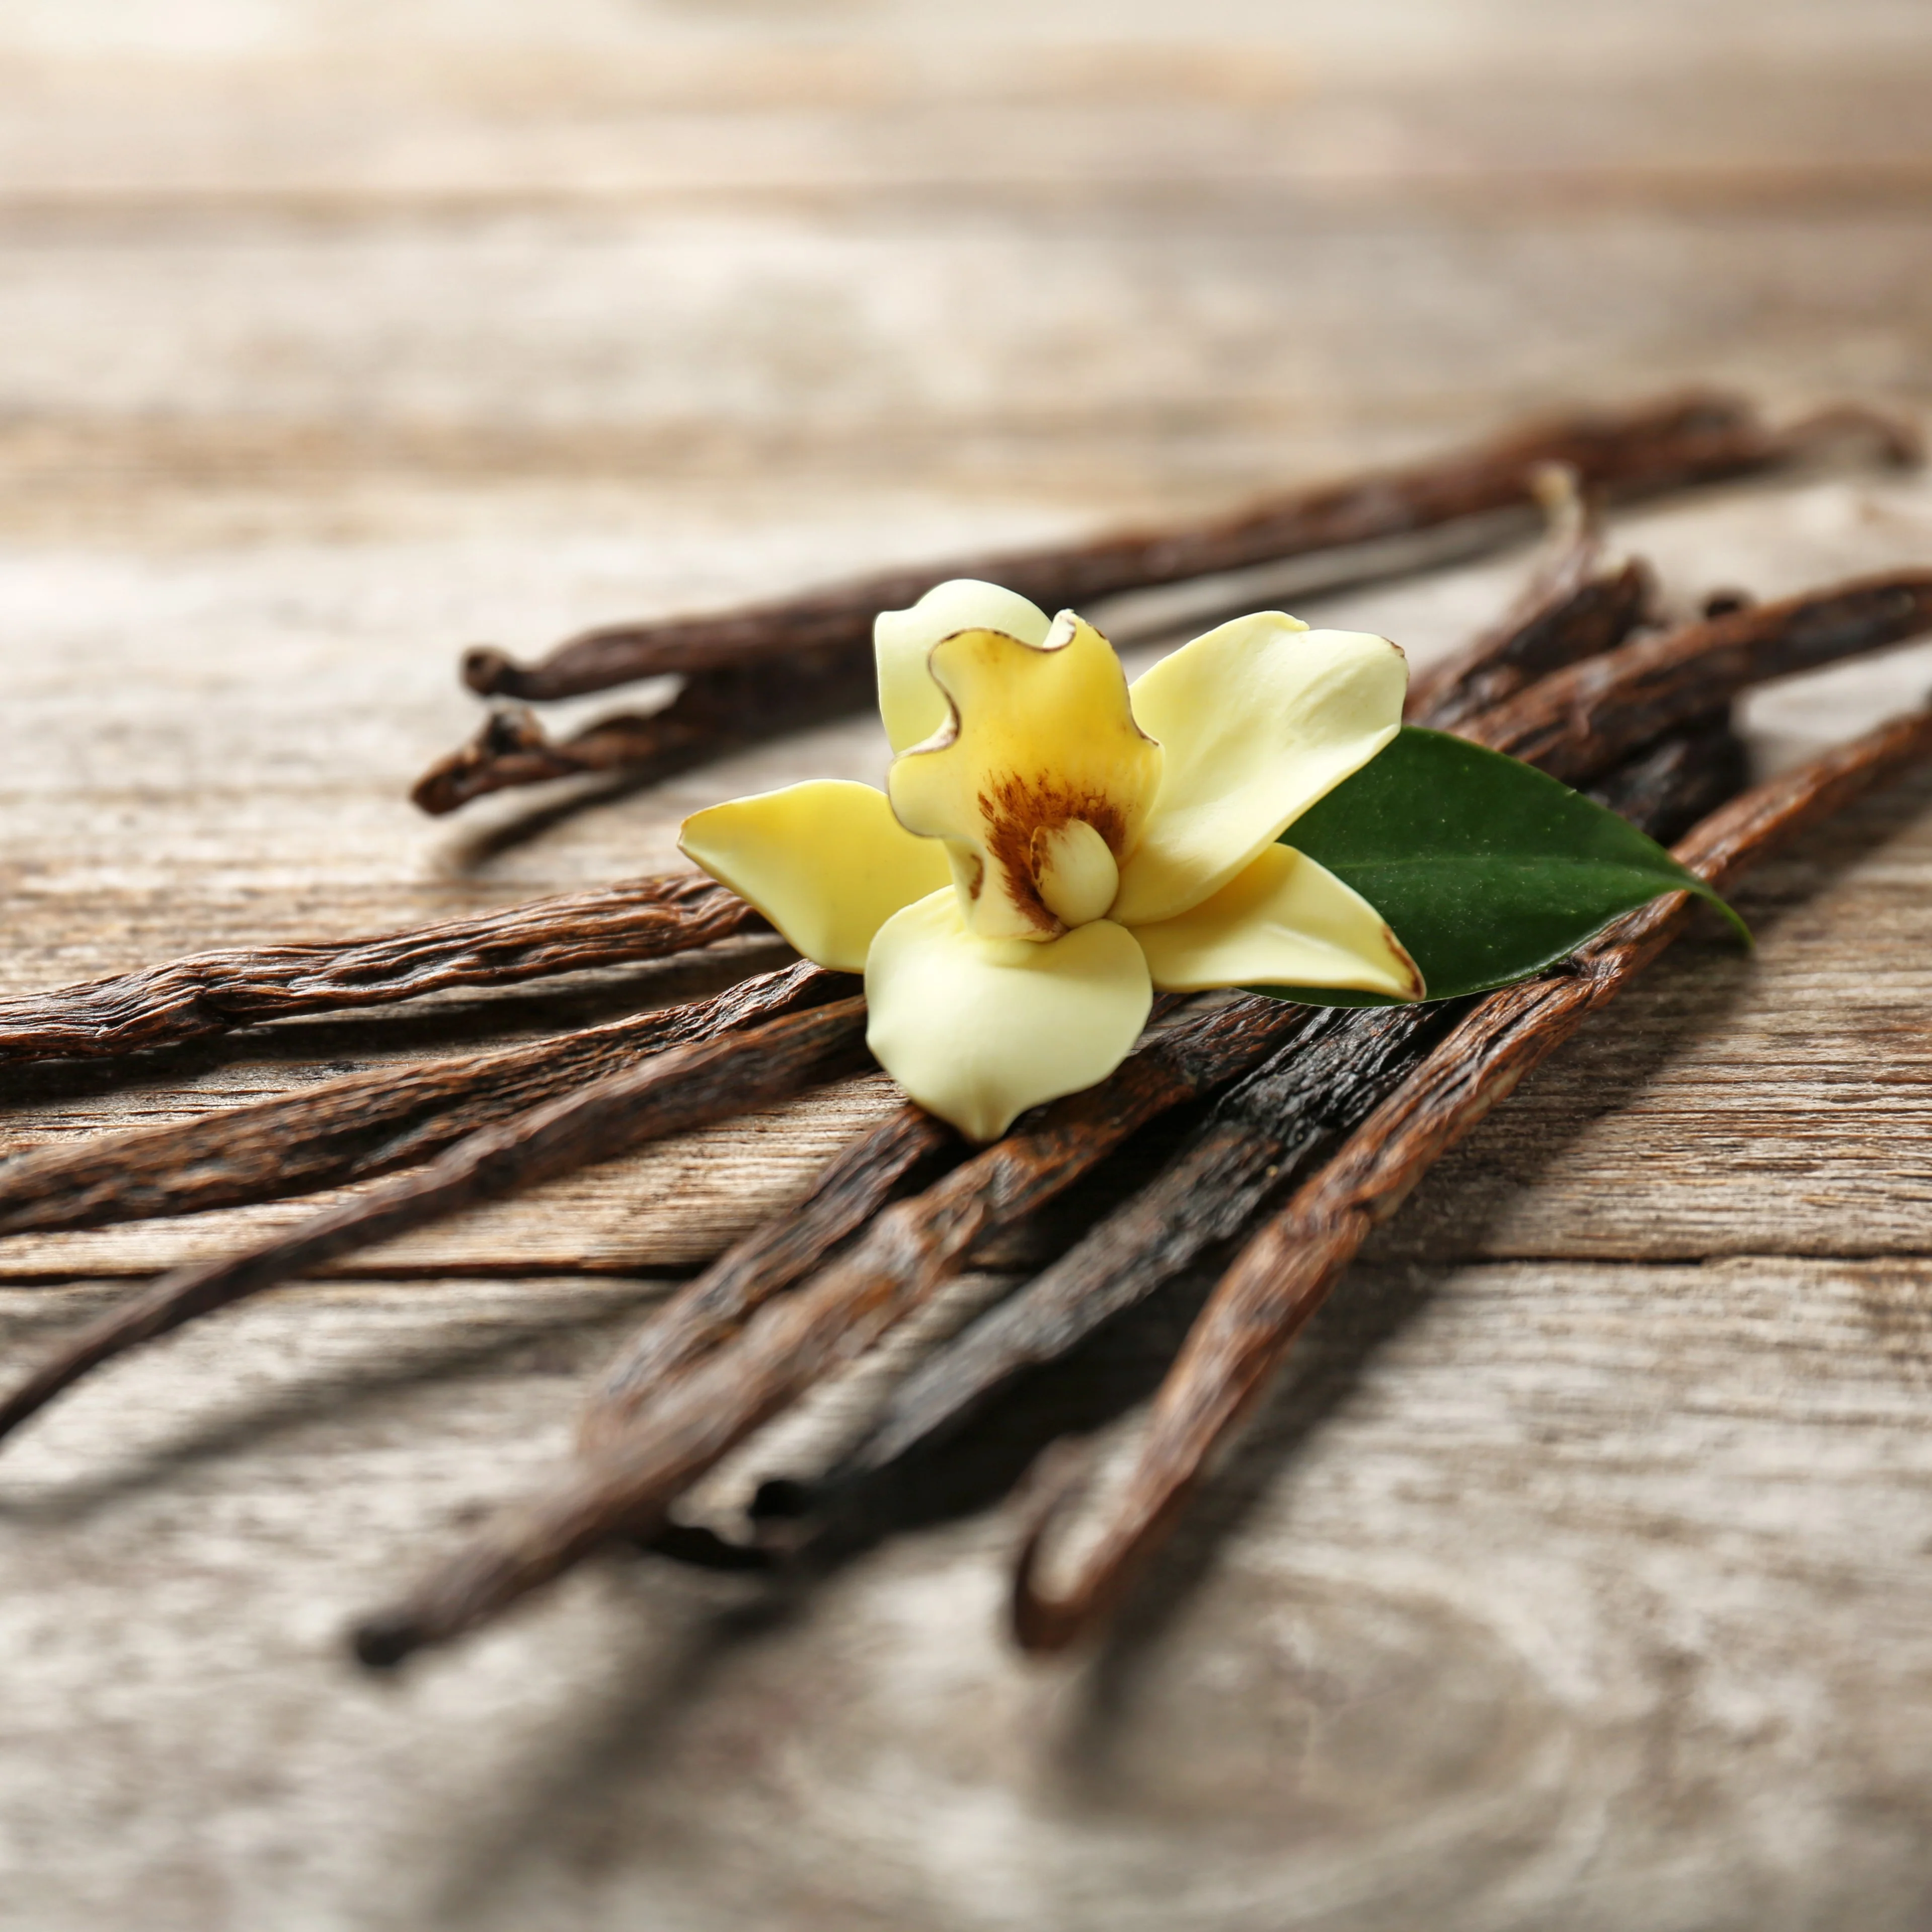 Vanilla Essential Oil Benefits: Remarkable Properties and Health Uses